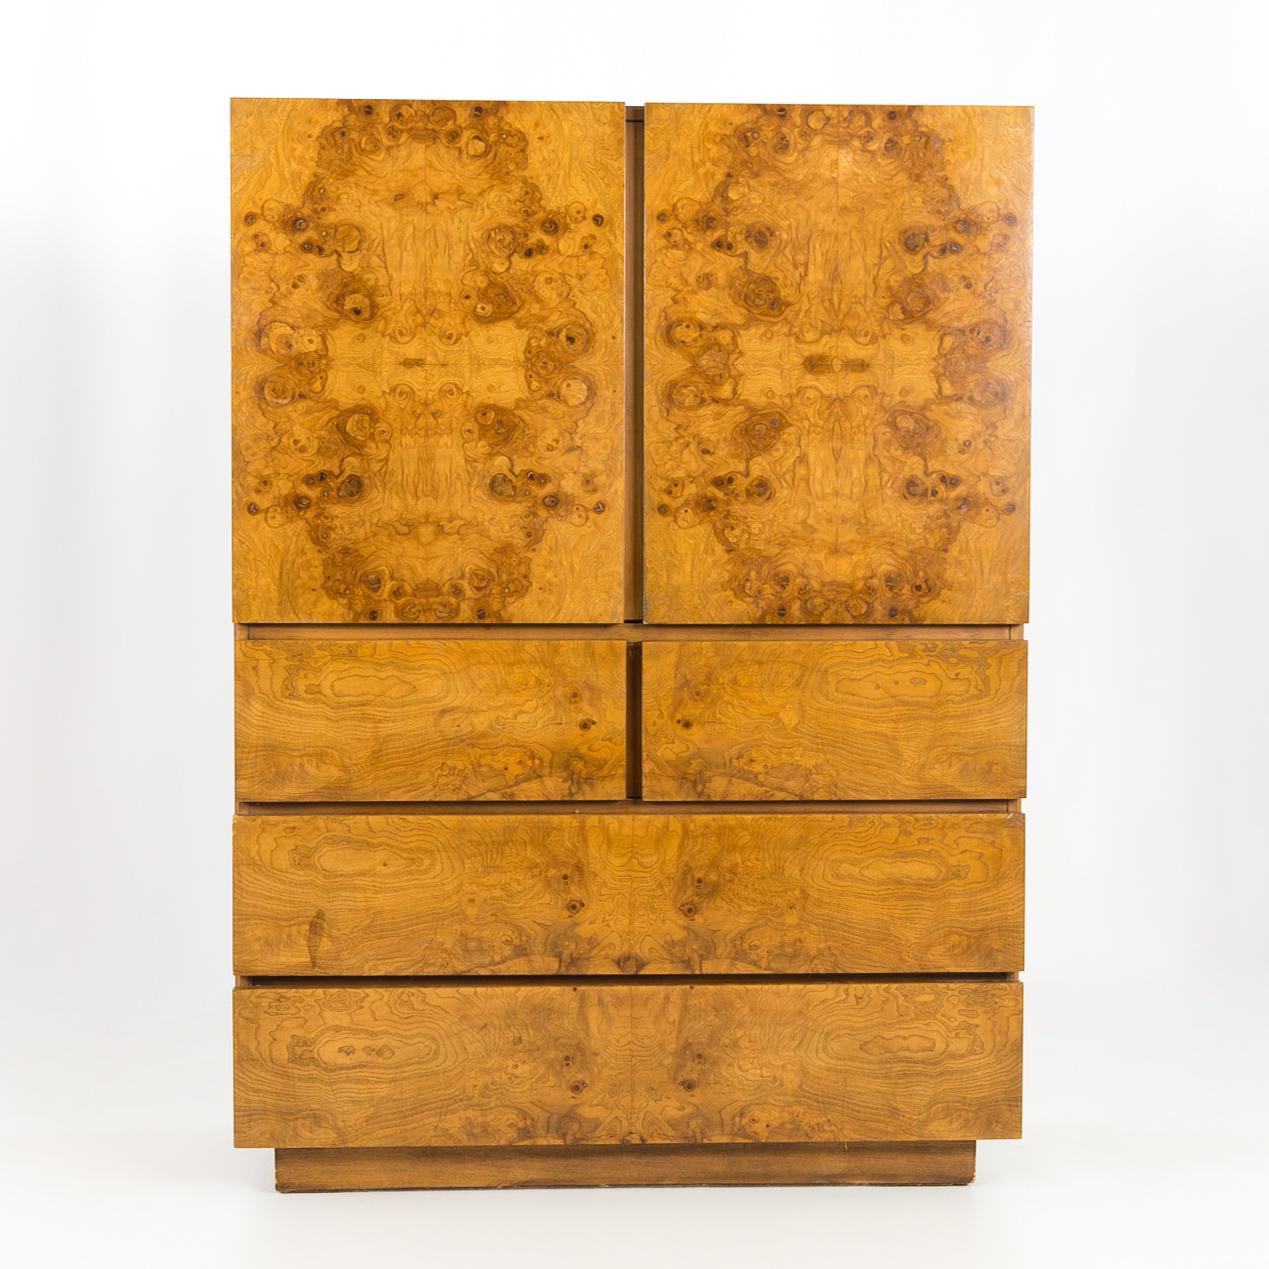 Milo Baughman for Lane Mid Century Burlwood Gentleman's Chest Highboy Dresser

This dresser measures: 42 wide x 18 deep x 58 inches high

All pieces of furniture can be had in what we call restored vintage condition. That means the piece is